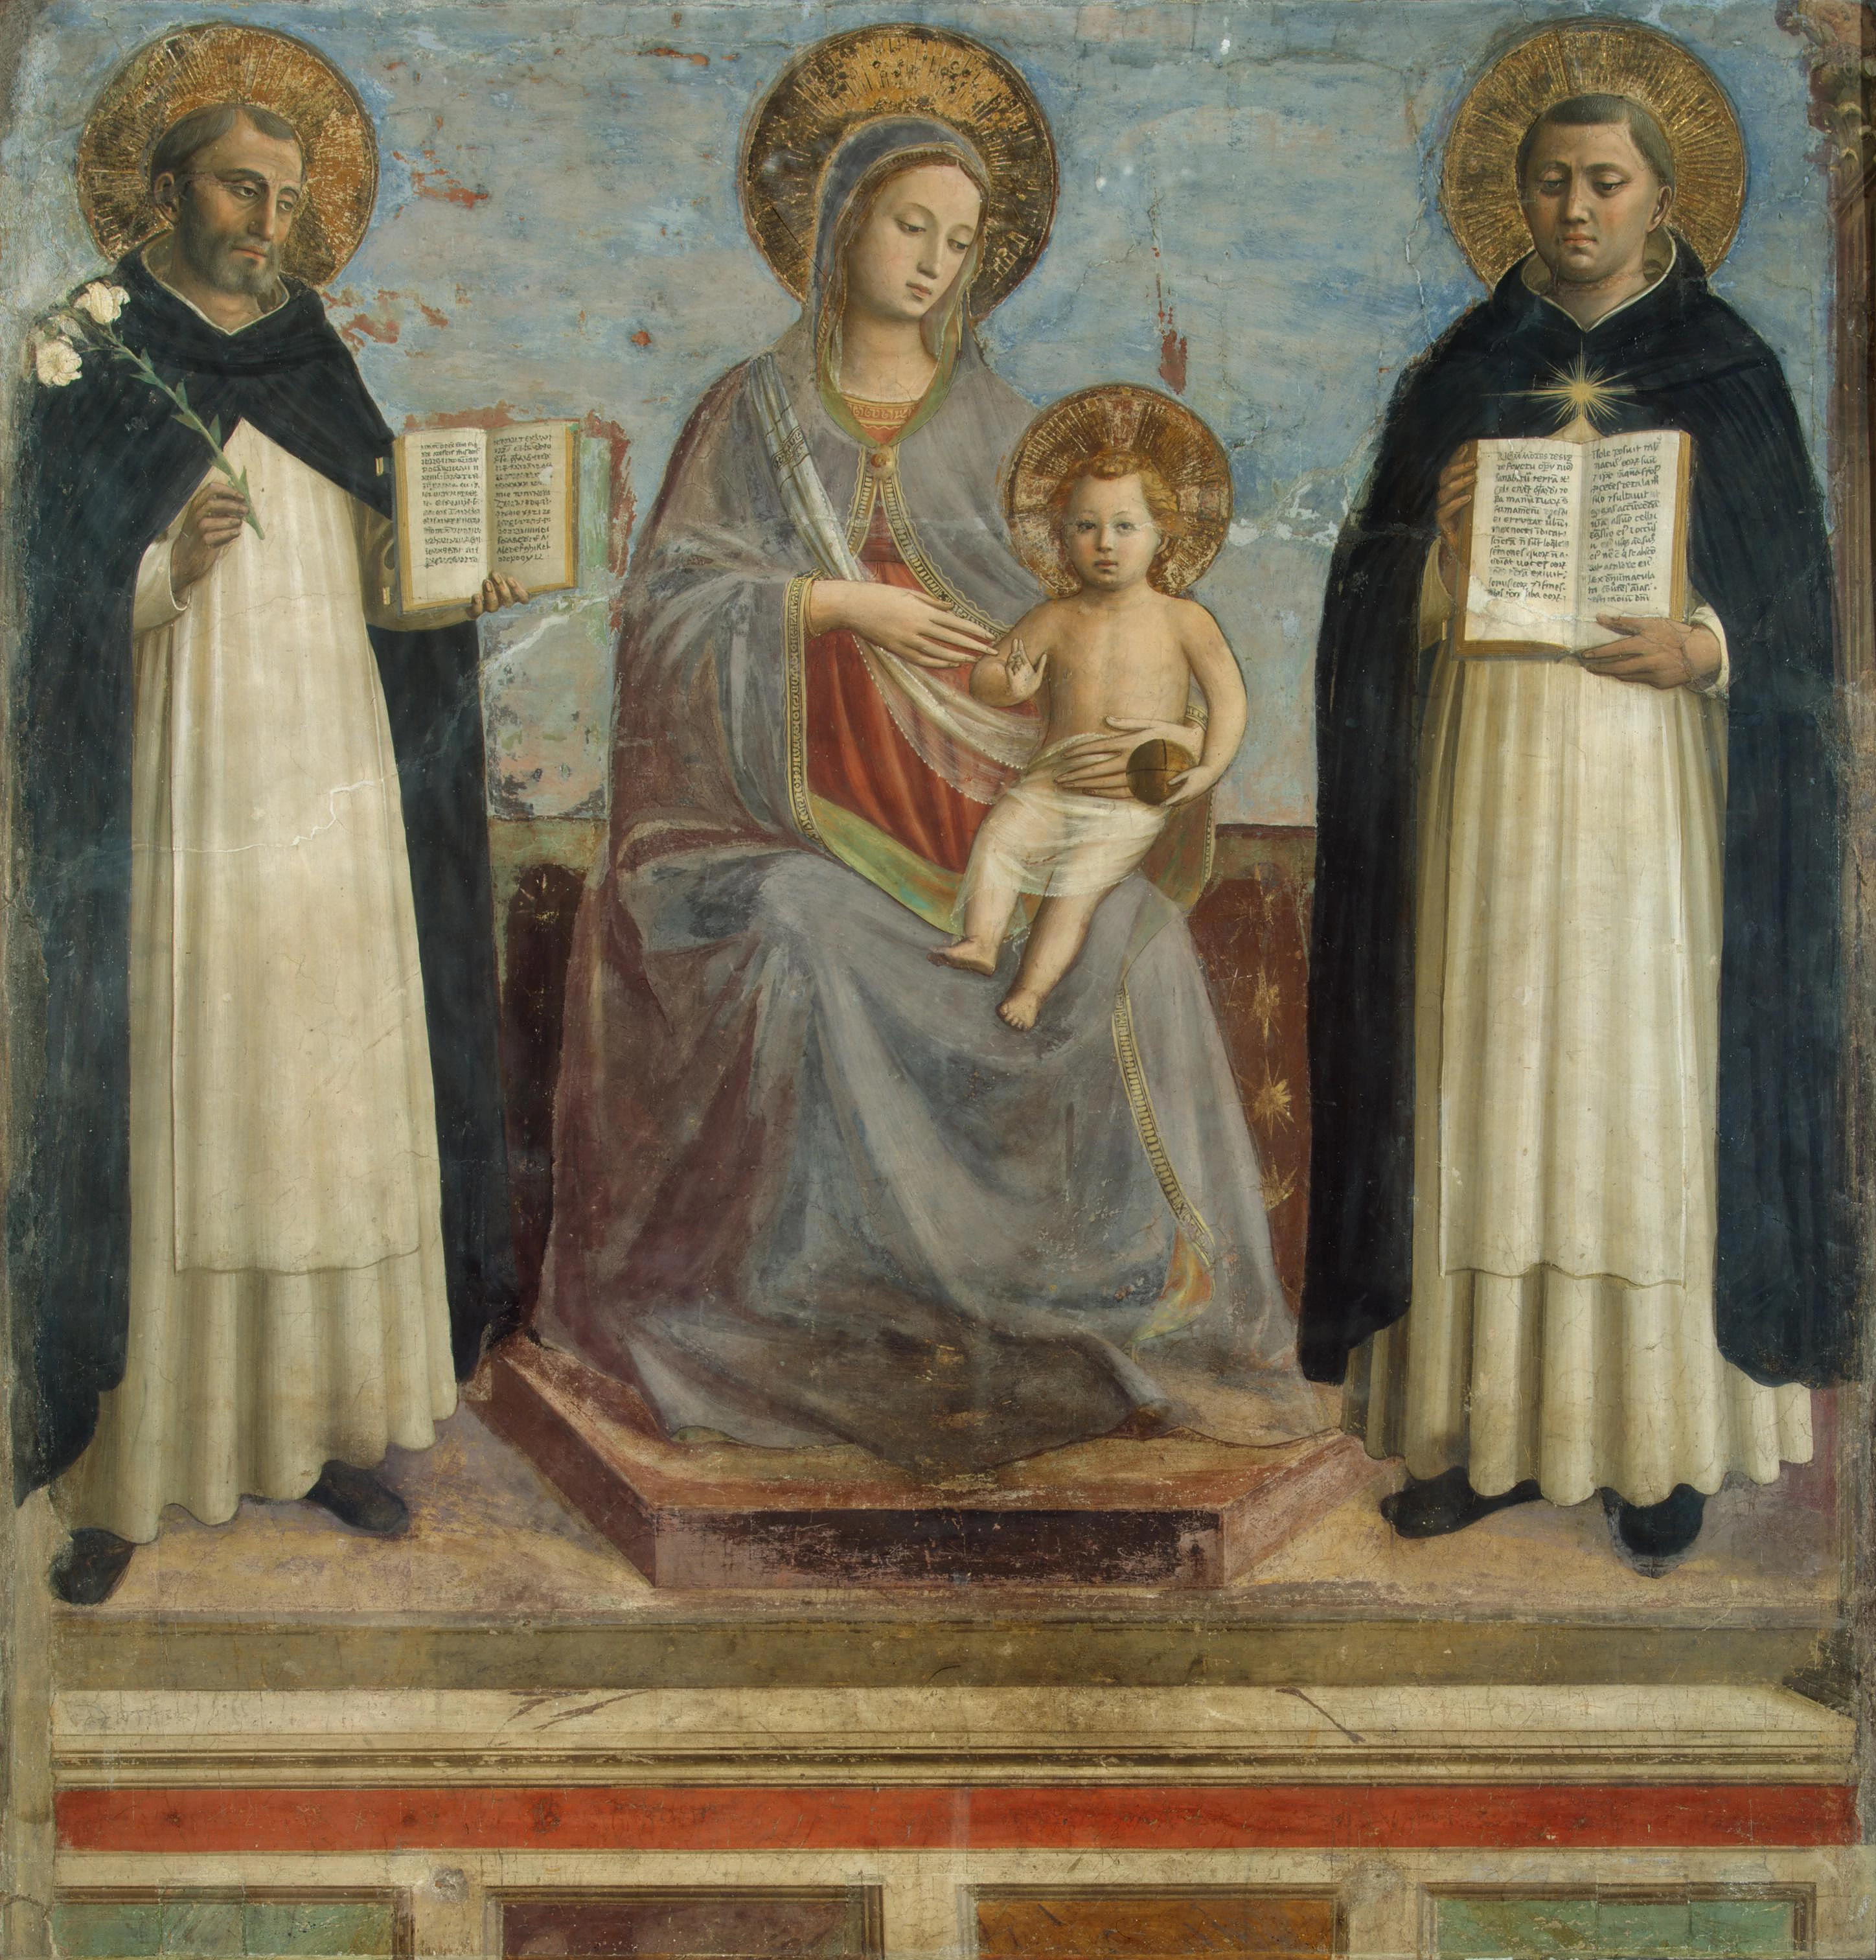 The Virgin and Child with St. Dominic and Thomas Aquinas, Fra Angelico